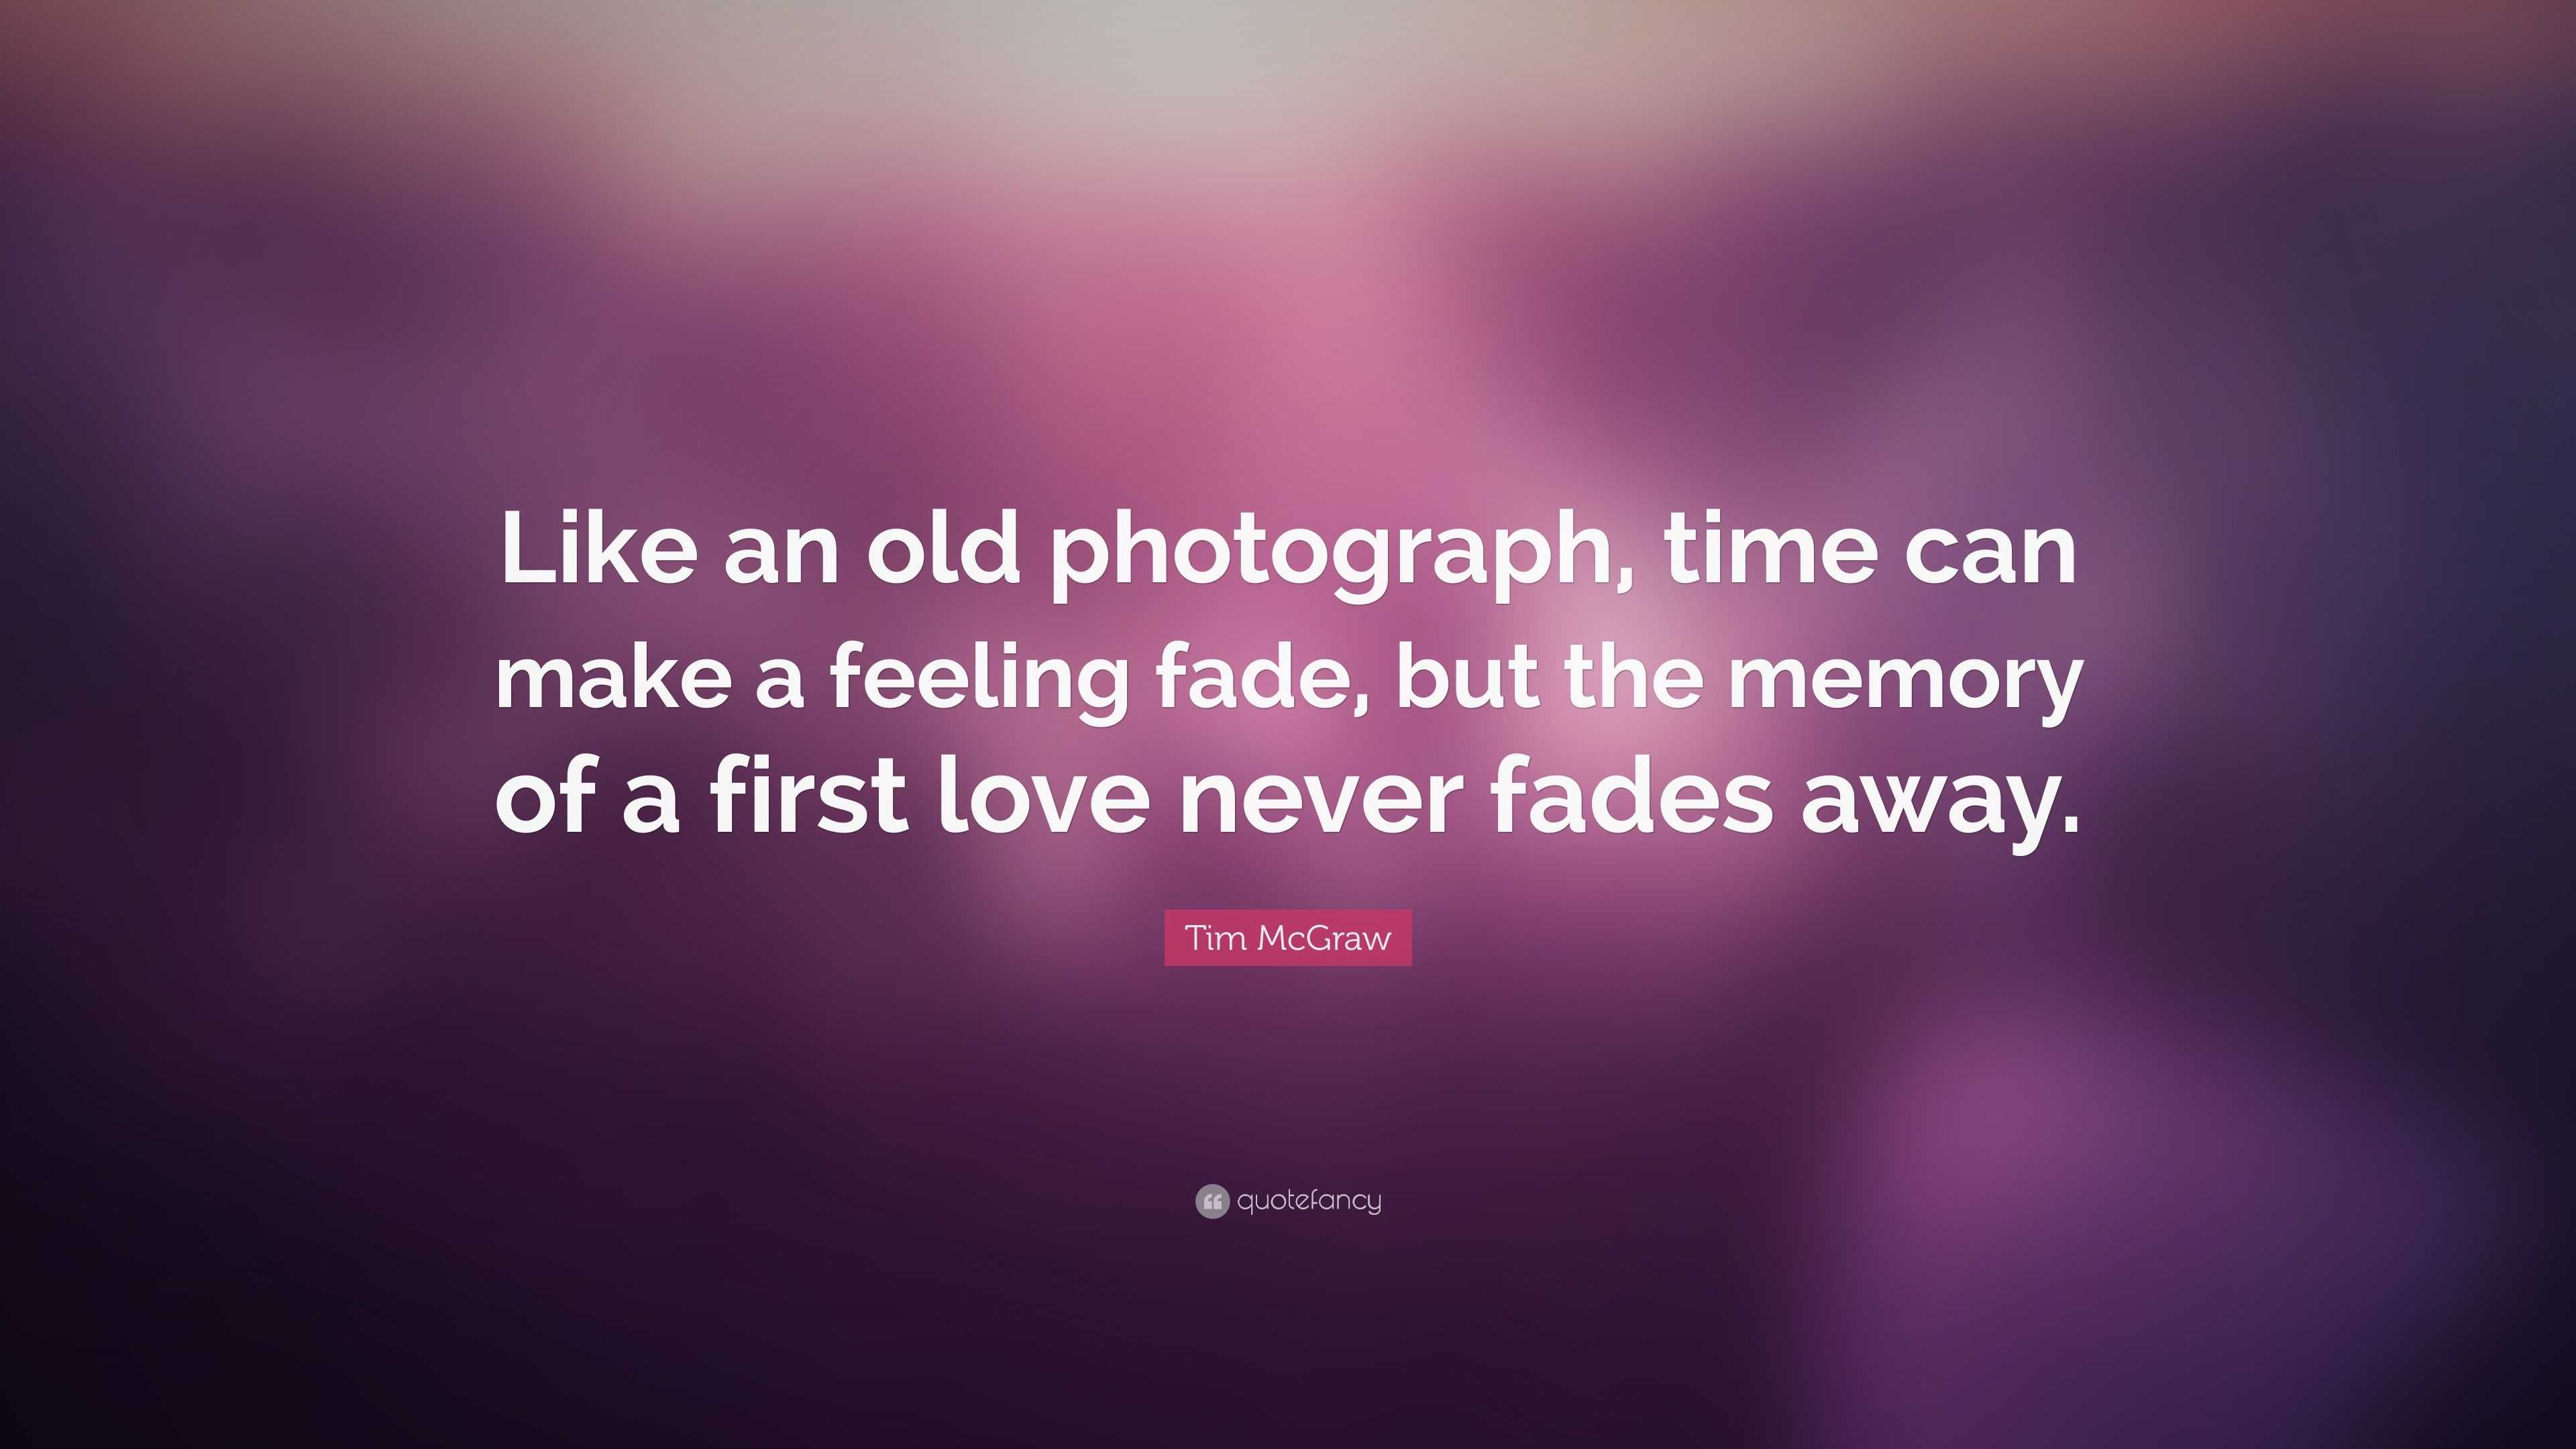 Tim McGraw Quote “Like an old photograph time can make a feeling fade